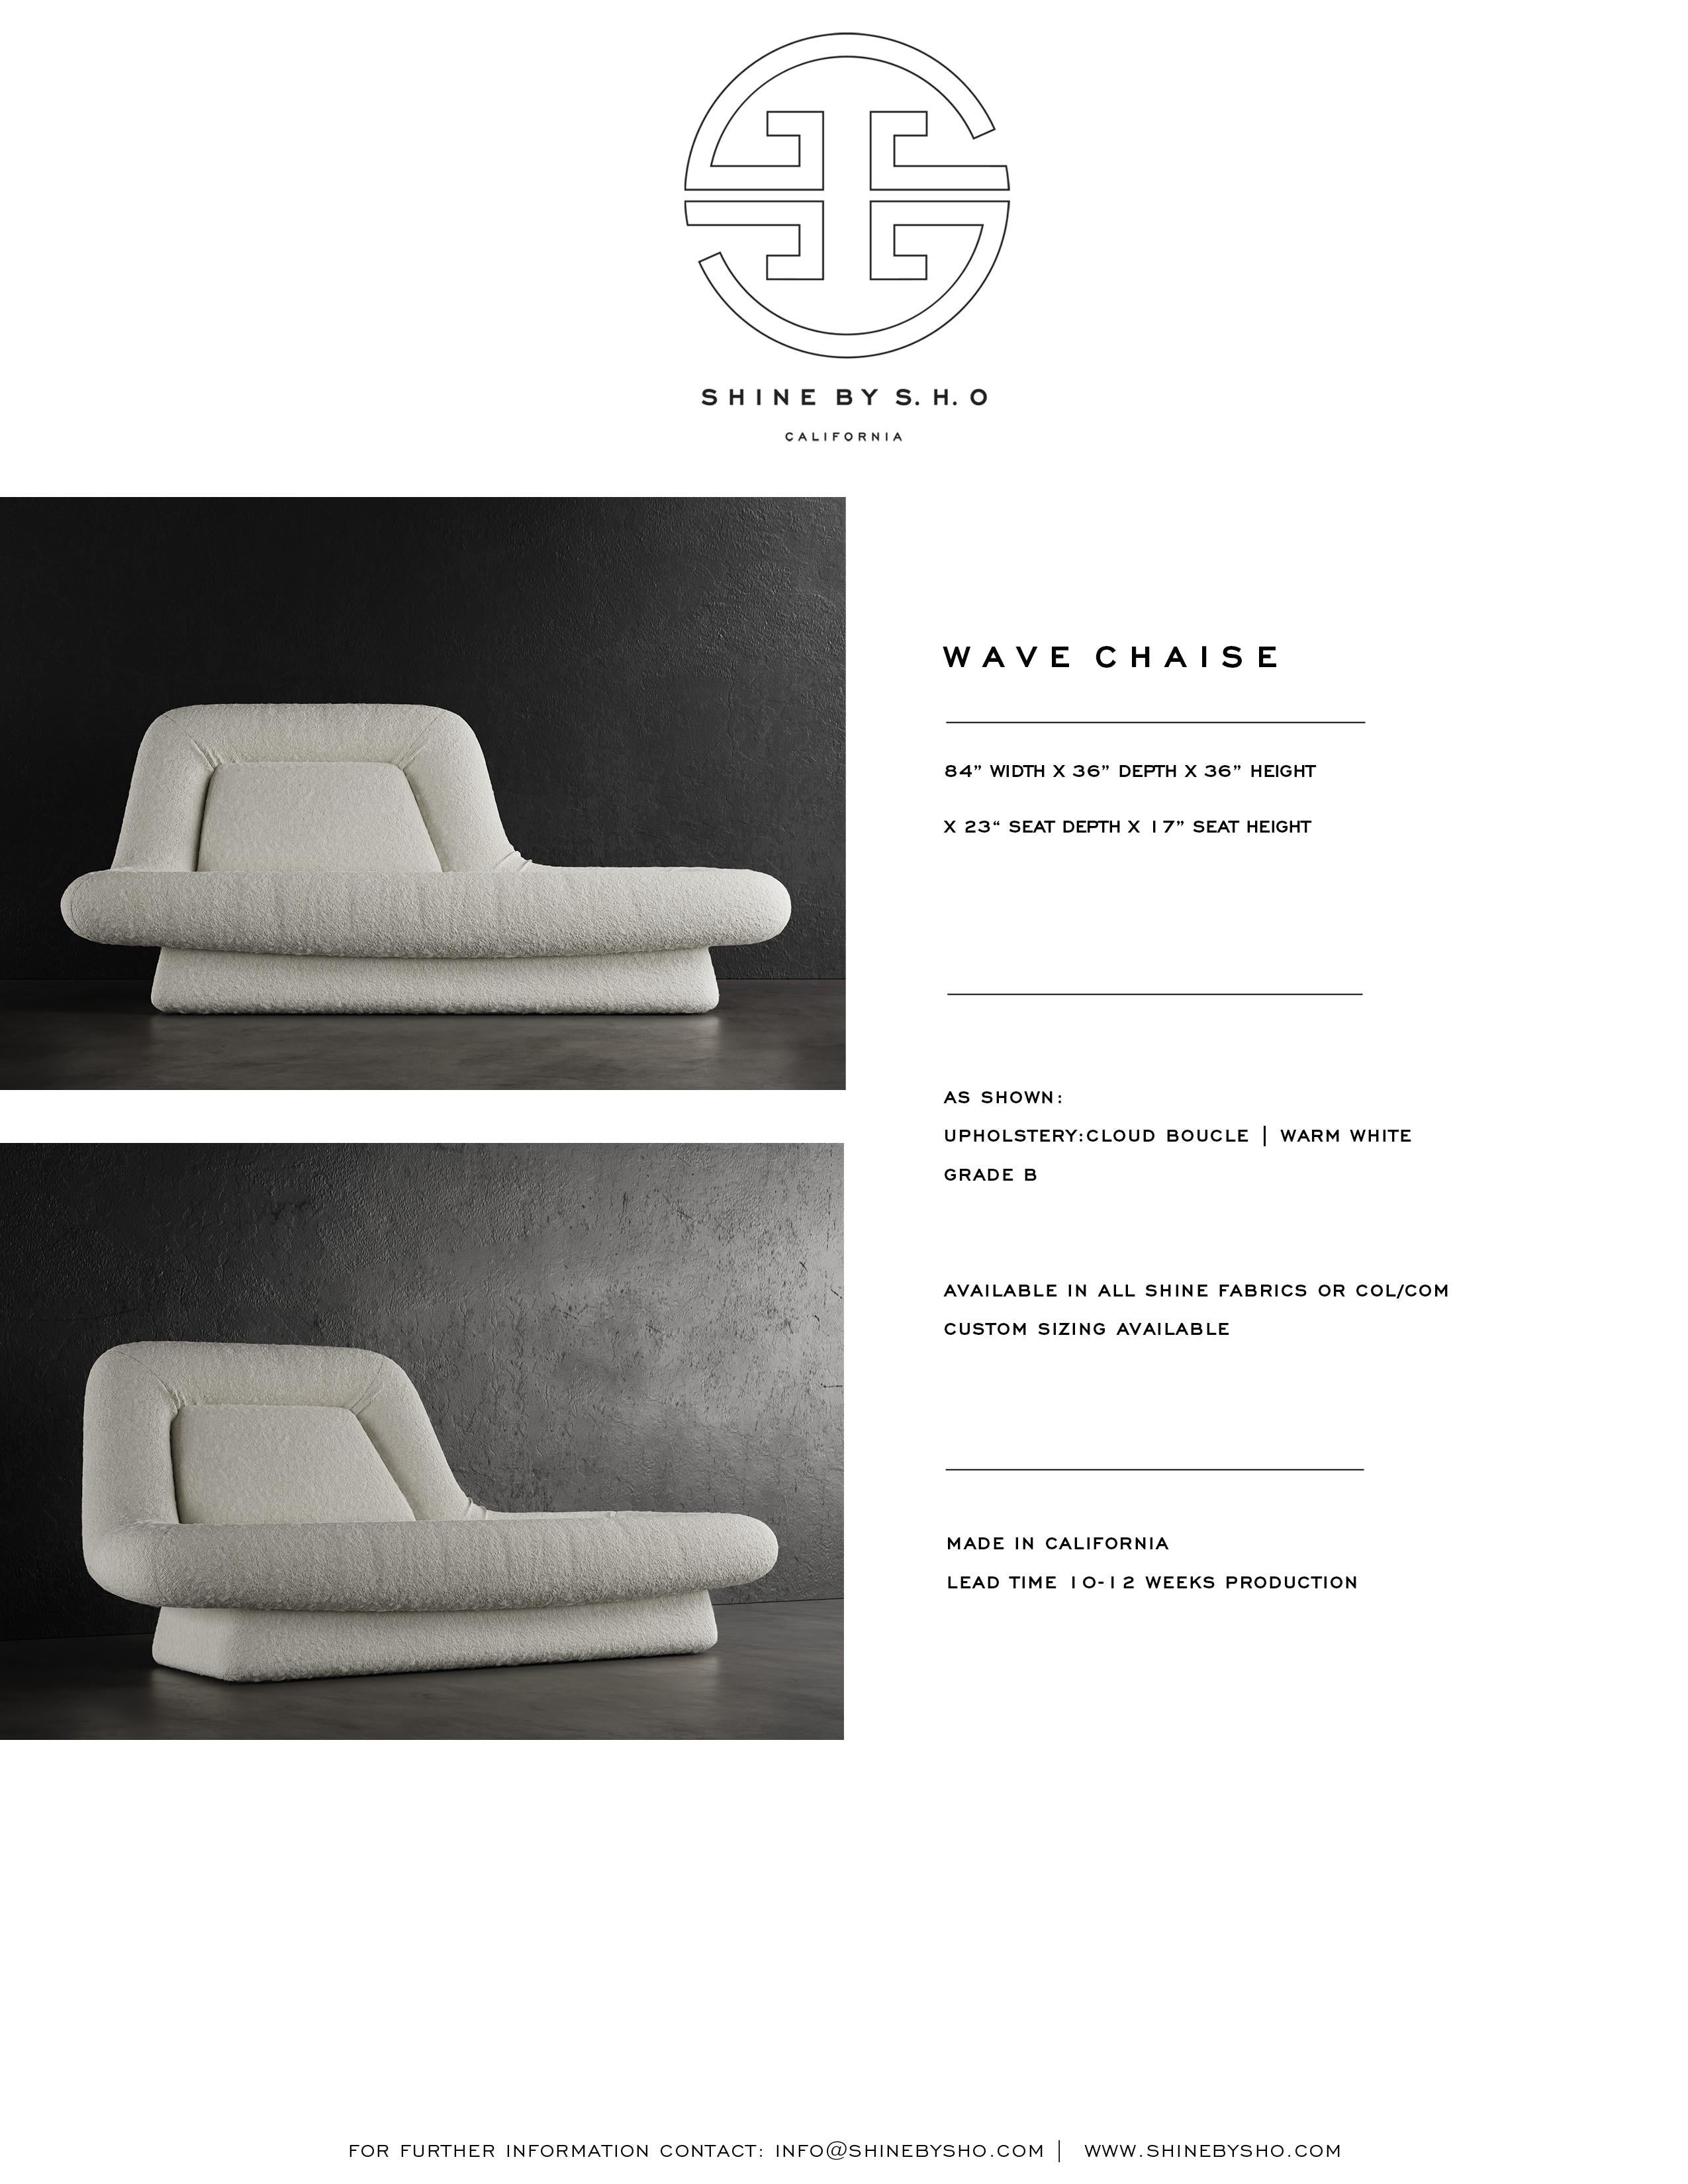 Contemporary WAVE CHAISE LOUNGE - Modern Design in Cloud Boucle in Warm White For Sale